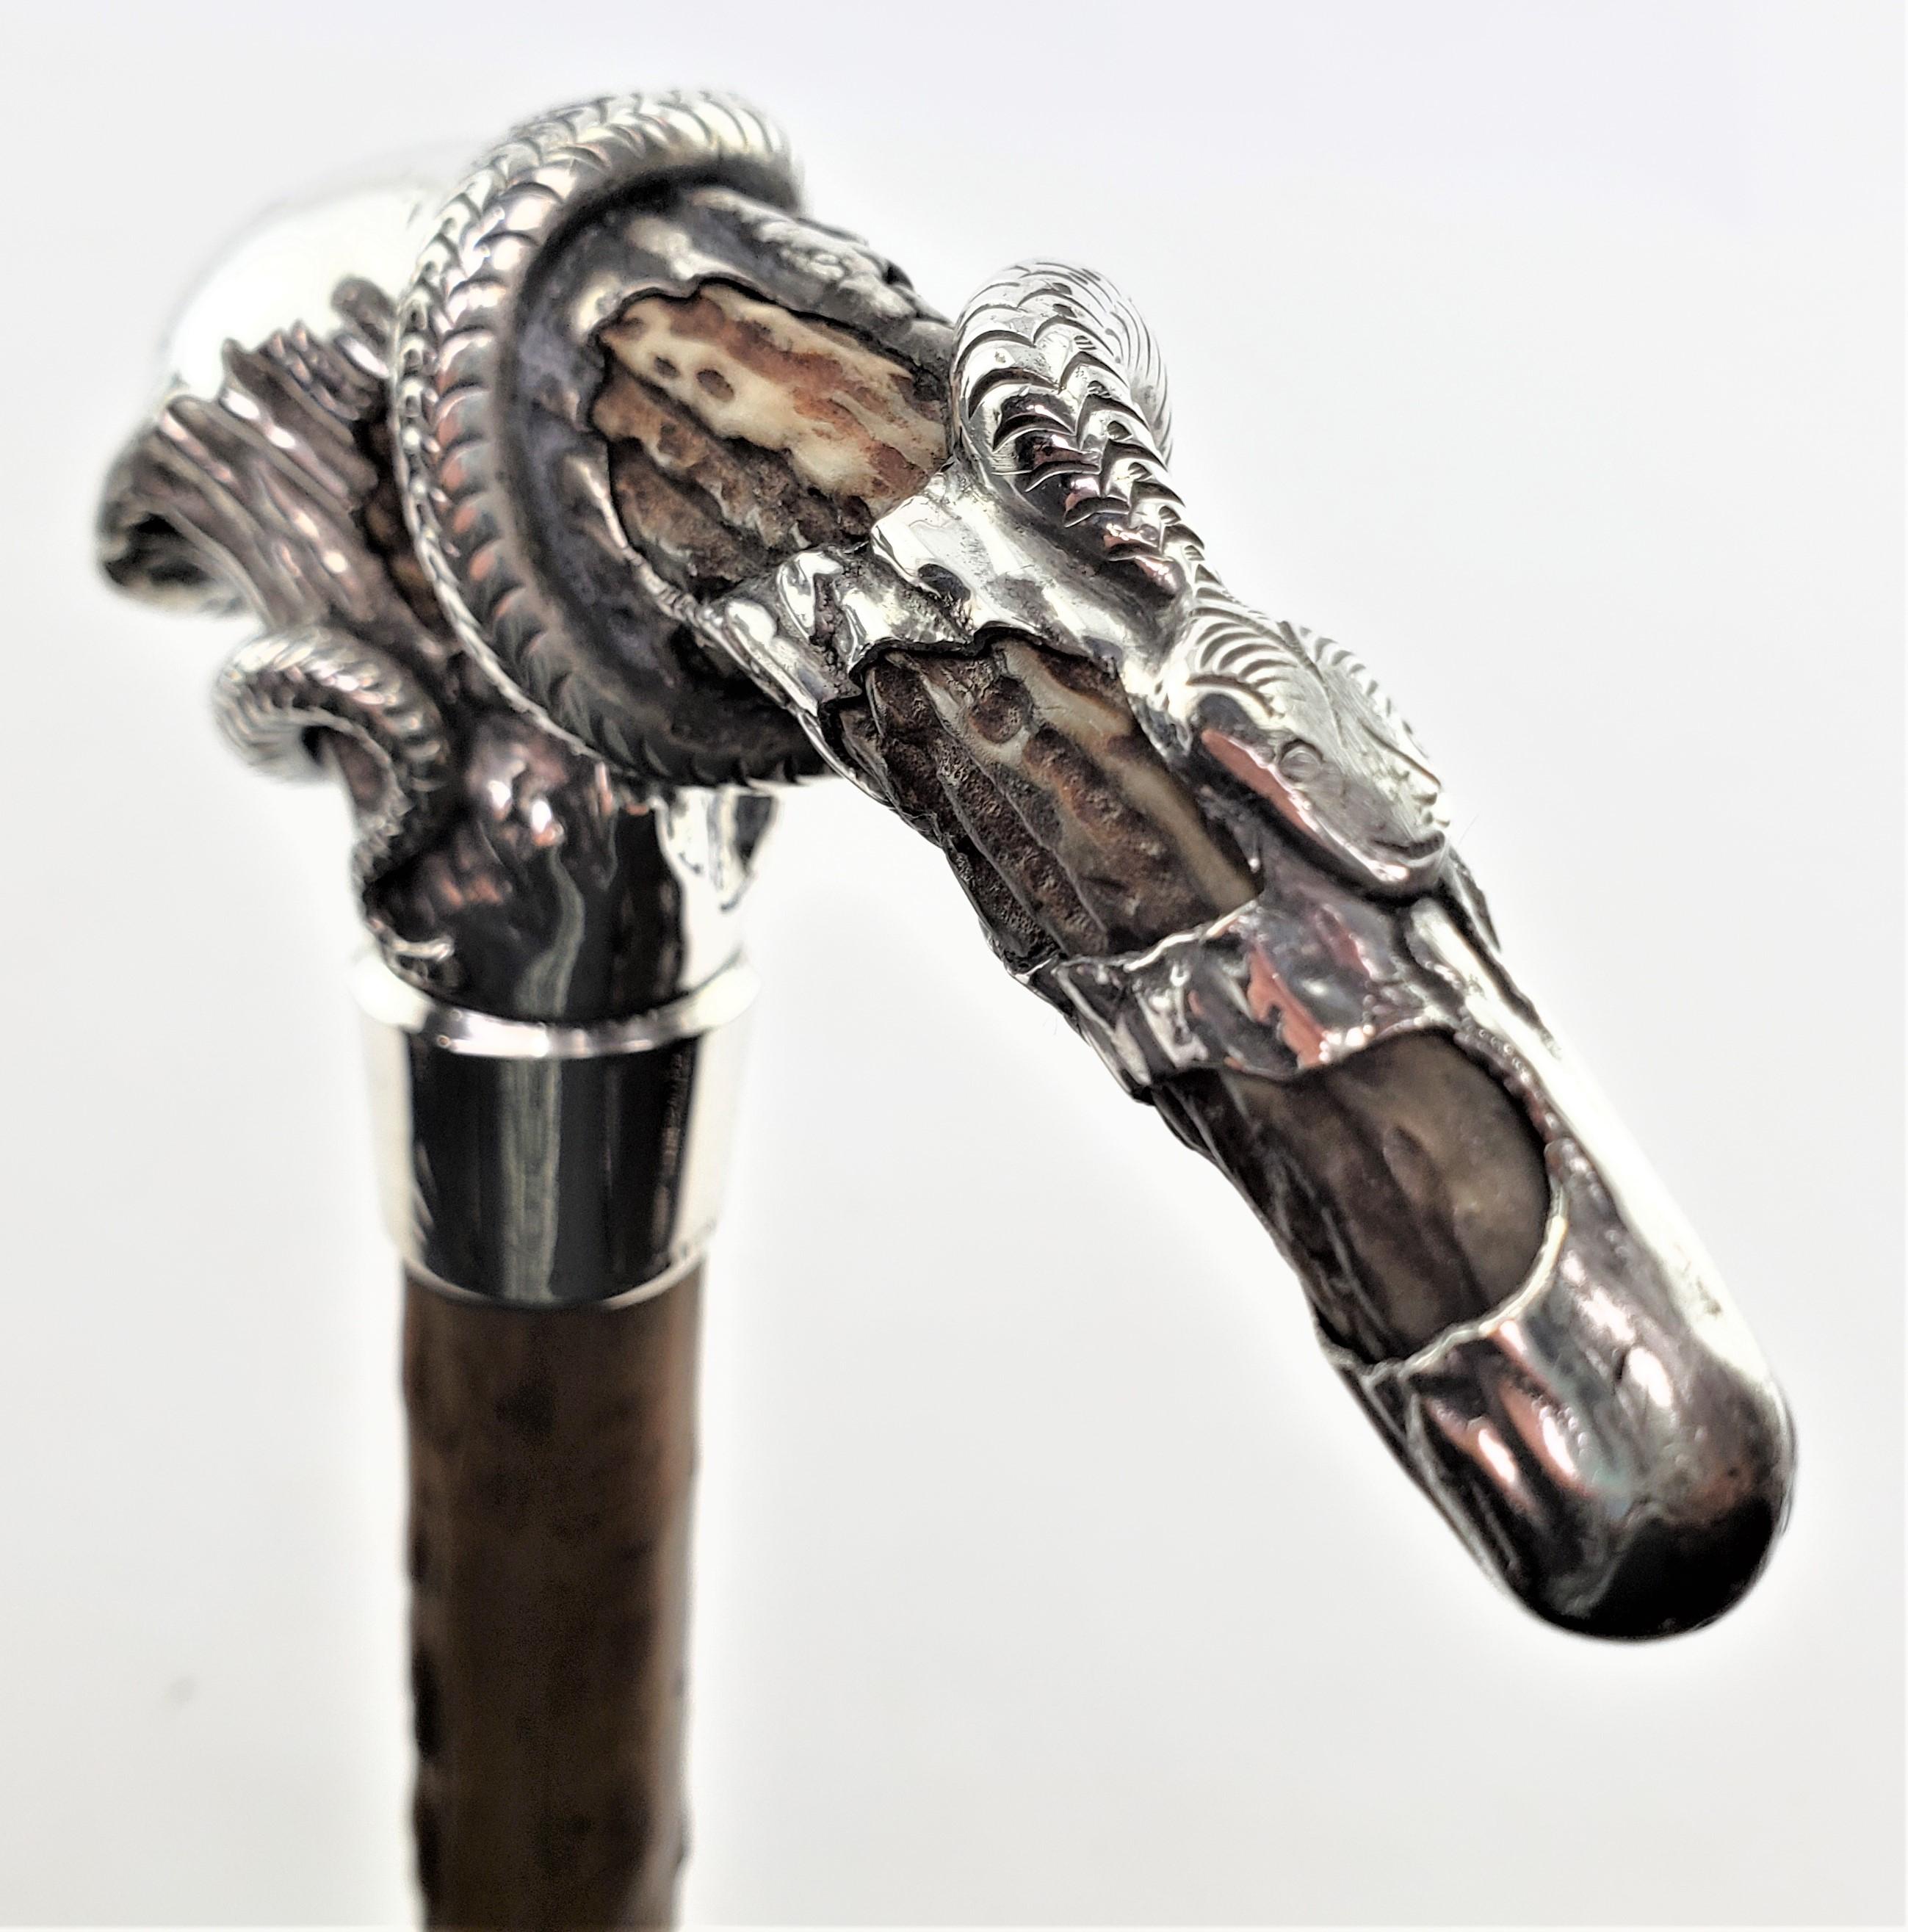 This antique and very well executed sterling silver handled walking stick or cane is unsigned, but presumed to have originated from the United States and dating to approximately 1880 and done in the period Victorian style. The handle of the cane is